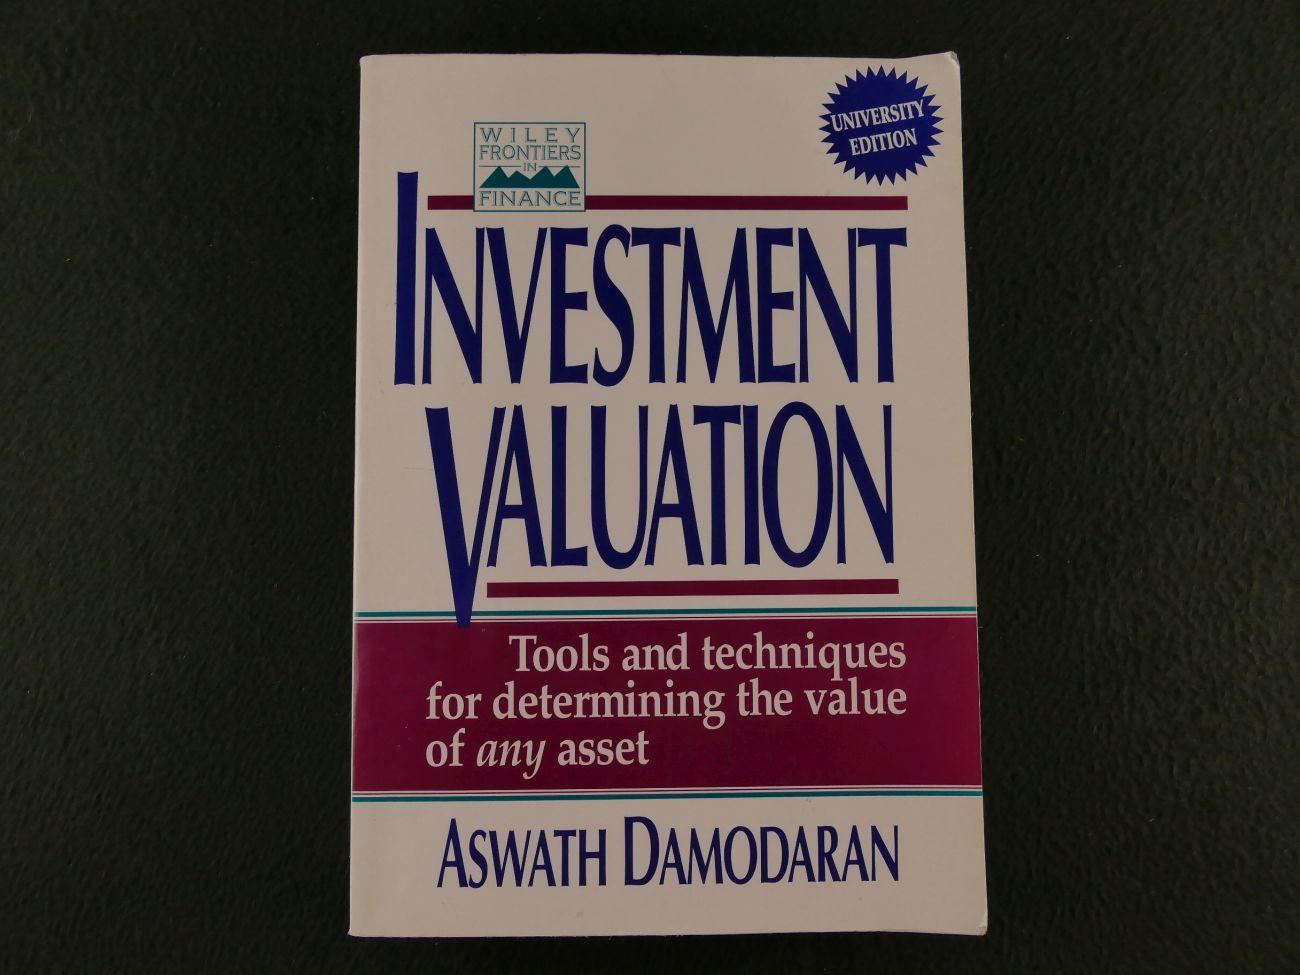 Damodaran, Aswath - Investment Valuation. Tools and techniques for determining the value of any asset (3 foto's)